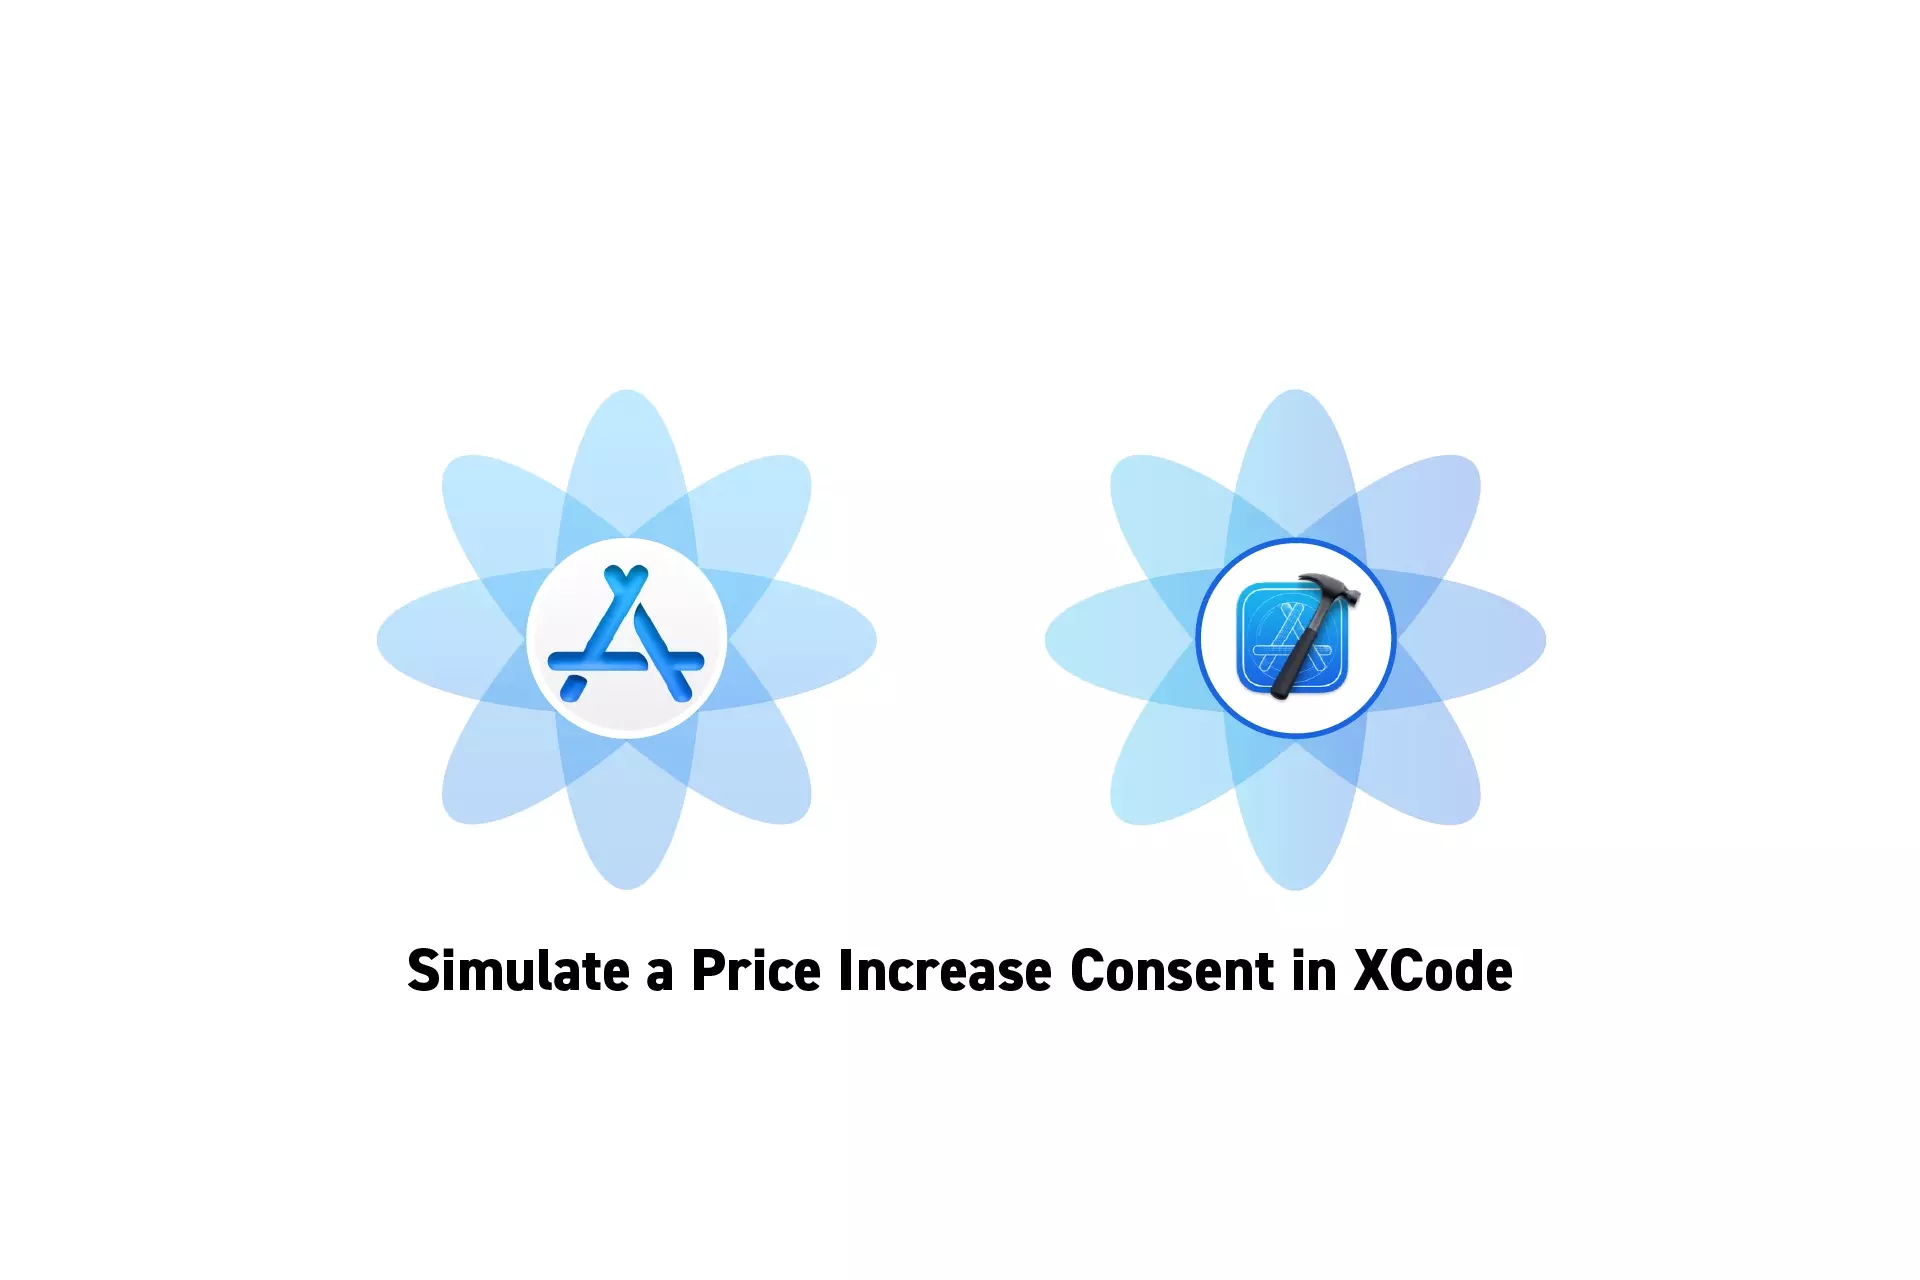 Two flowers that represent StoreKit and XCode side by side. Beneath them sits the text “Simulate a Price Increase Consent in XCode.”